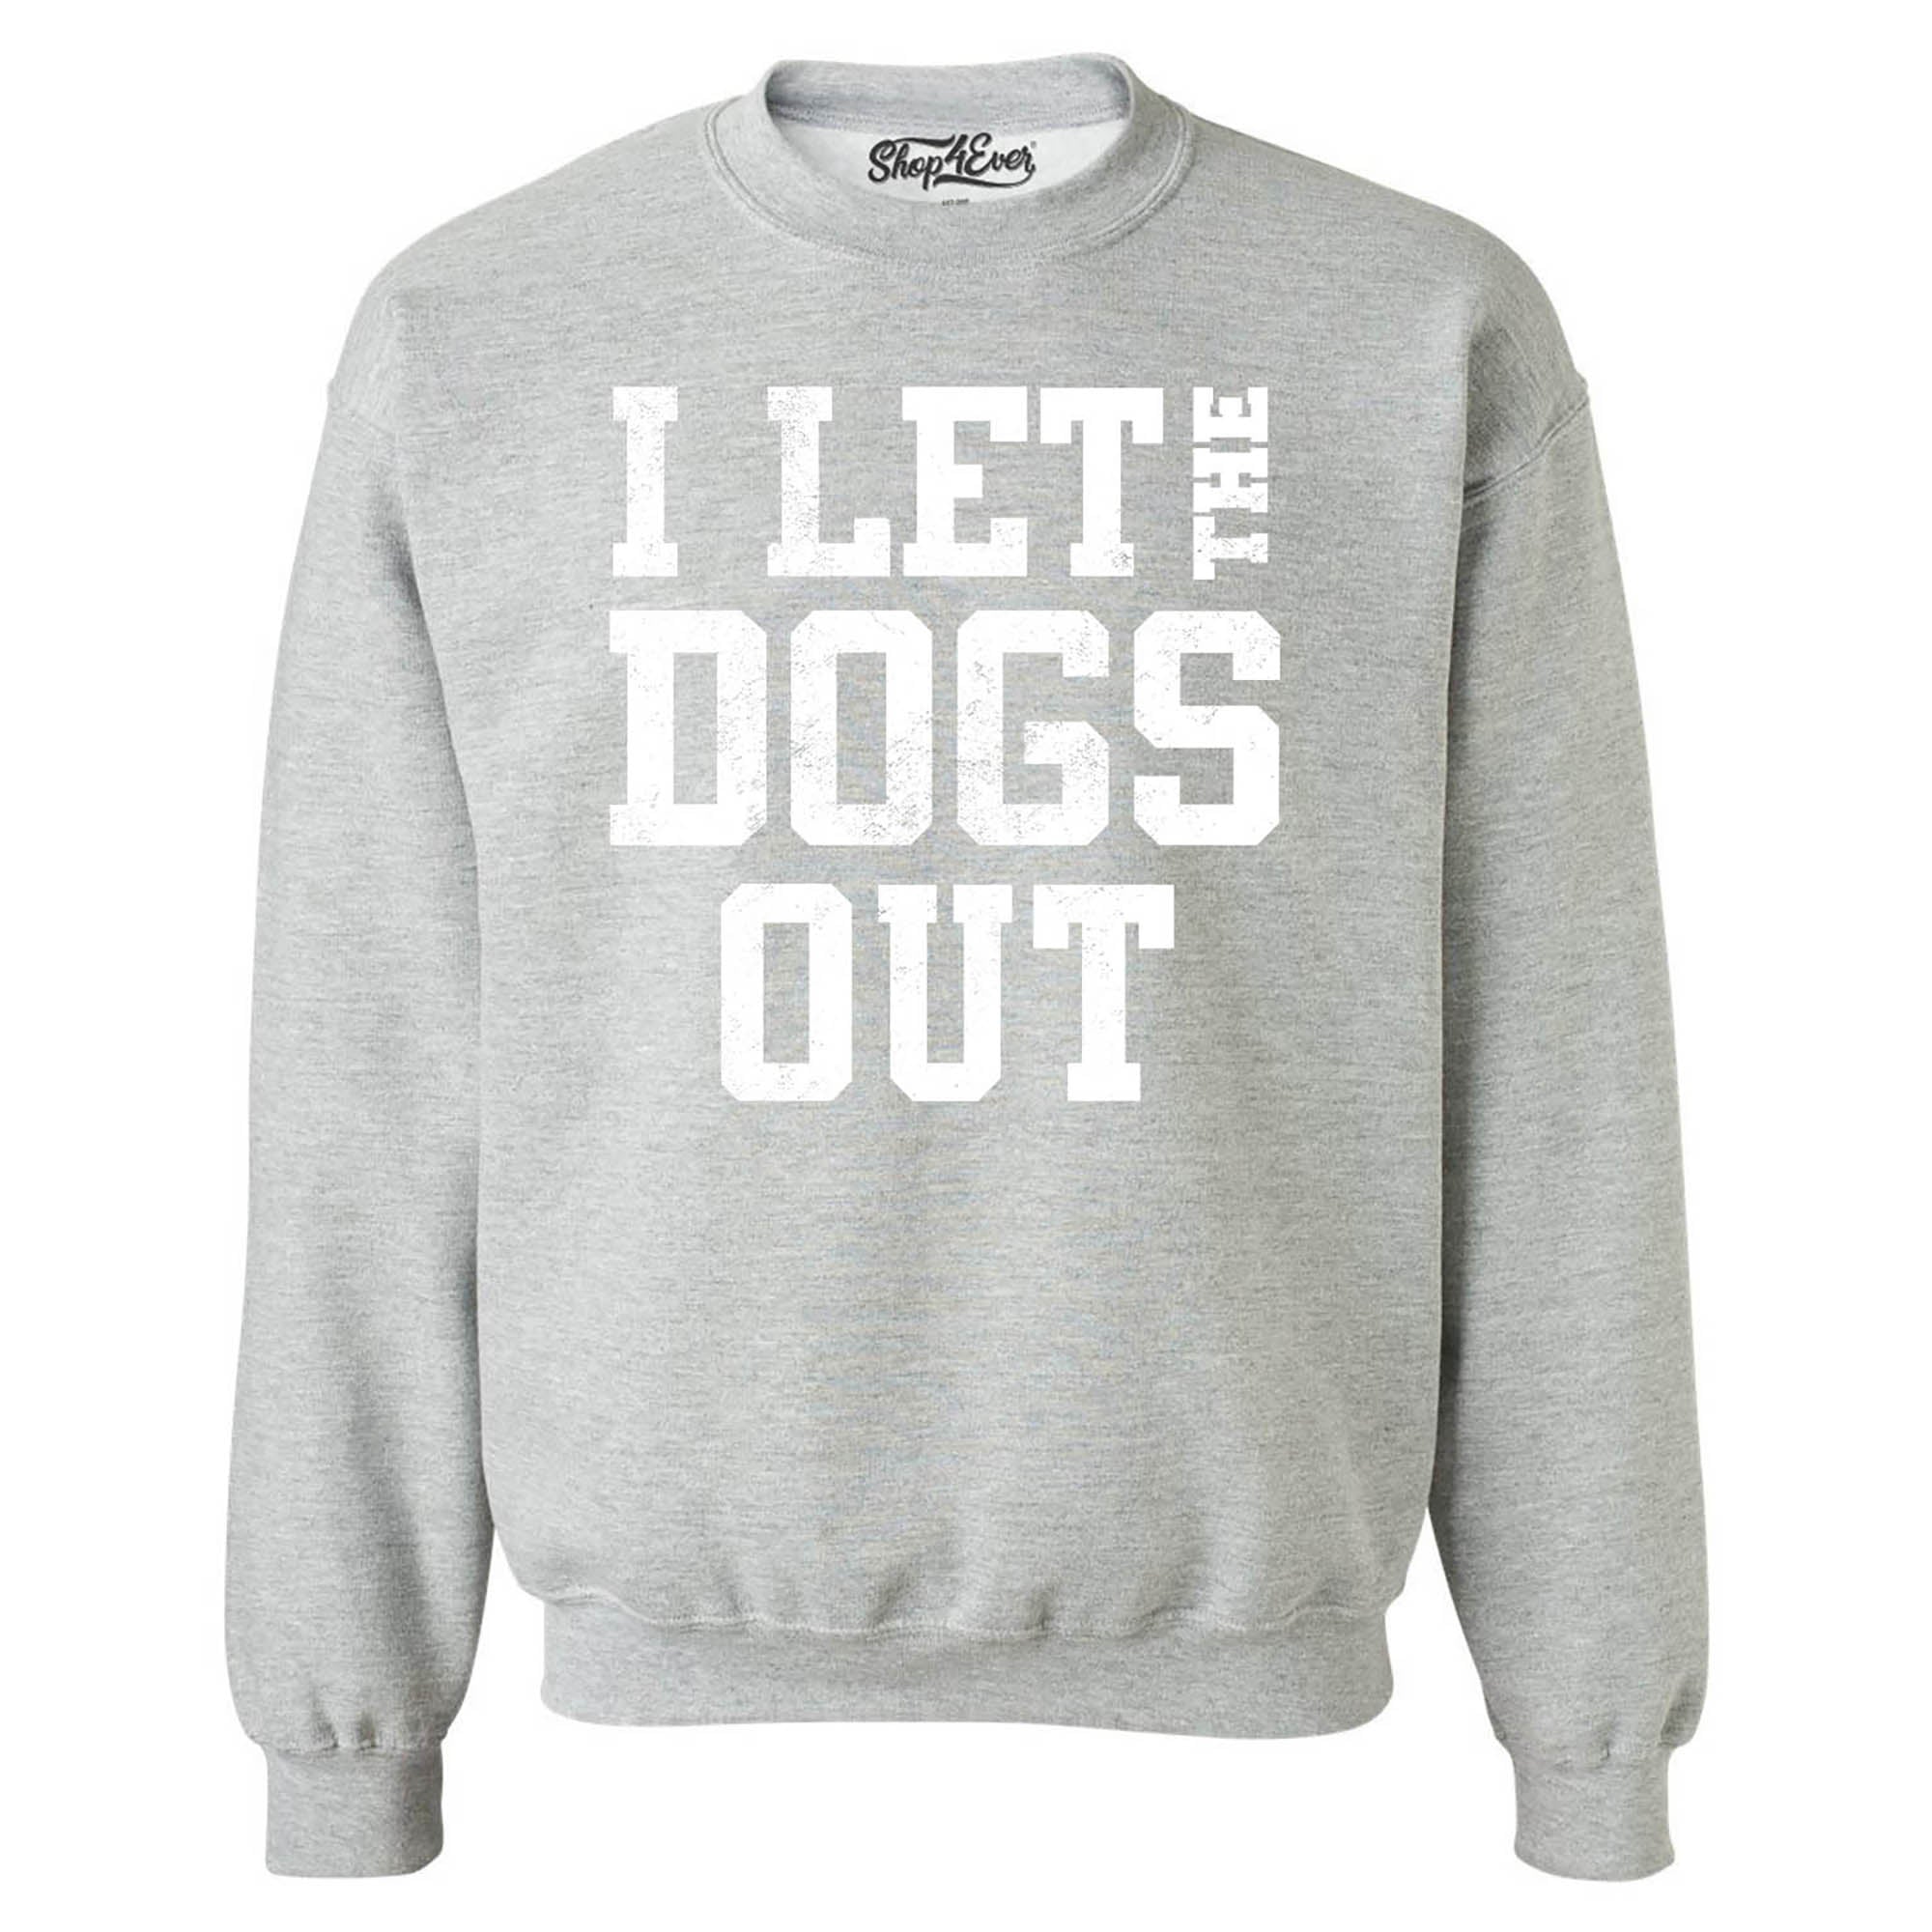 I Let the Dogs Out Crewneck Sweatshirts